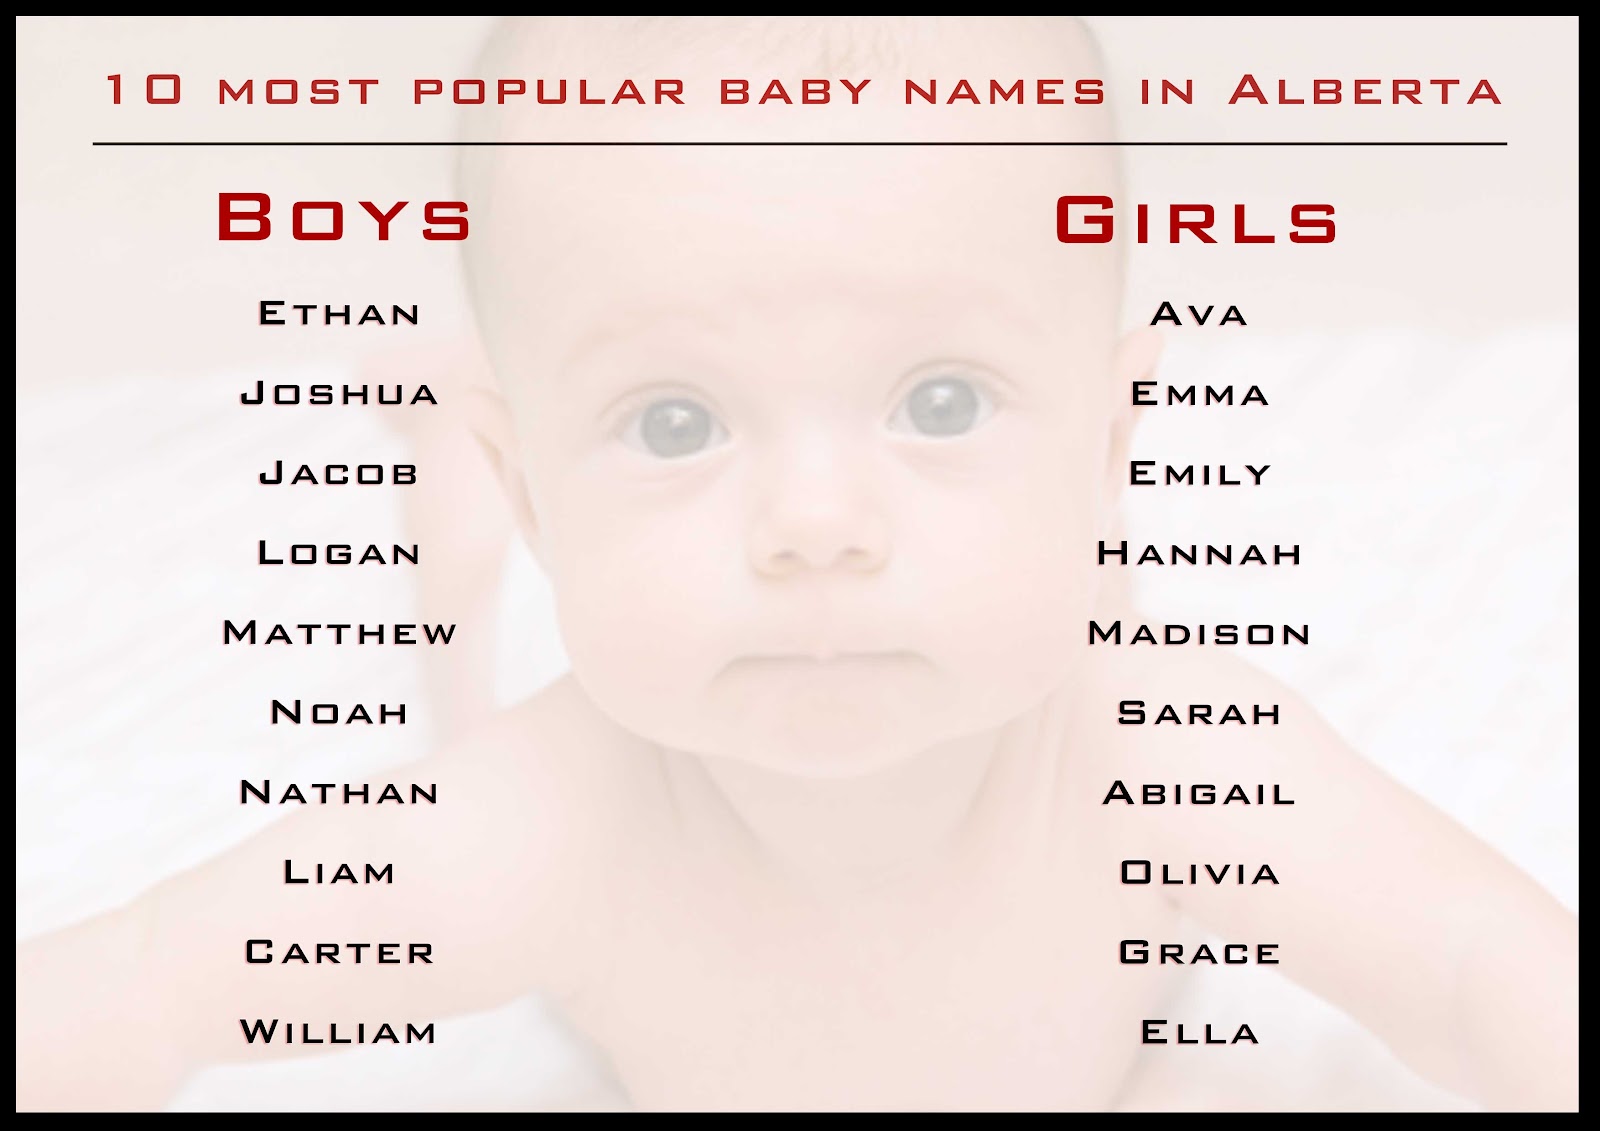 Oh Baby Noah Olivia Top List Of Most Popular Baby Names In Alberta | My ...